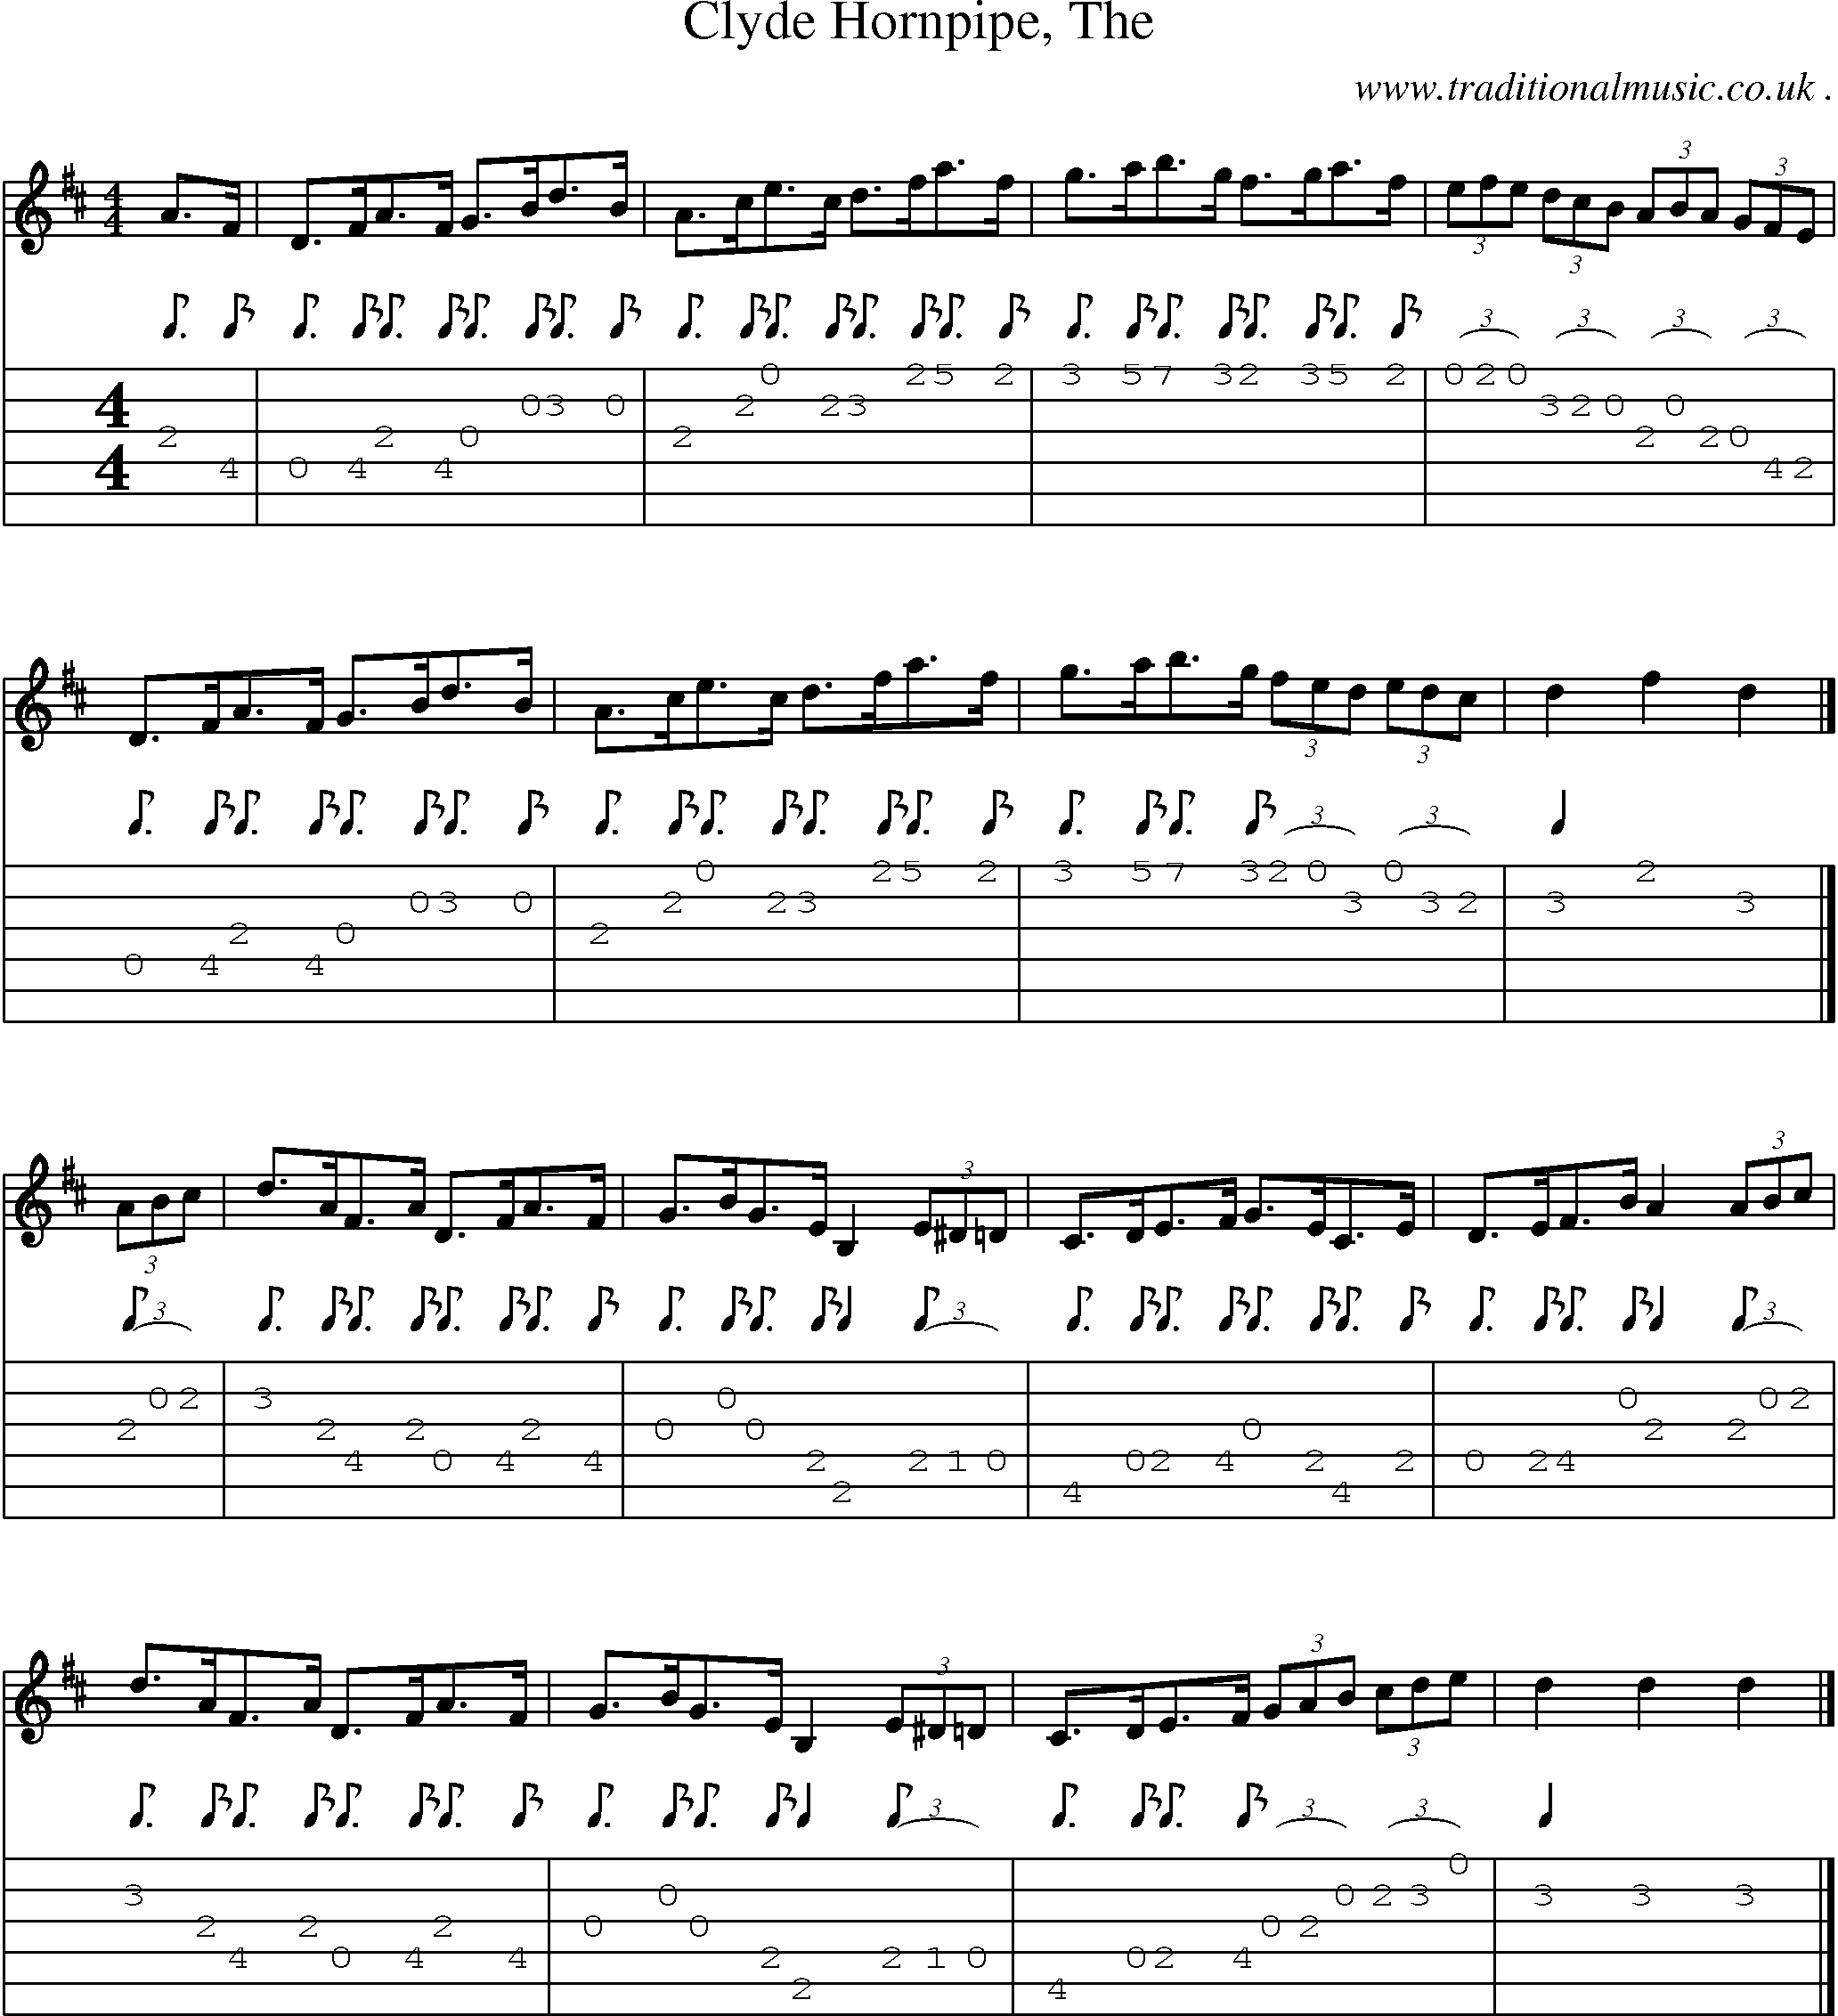 Sheet-music  score, Chords and Guitar Tabs for Clyde Hornpipe The